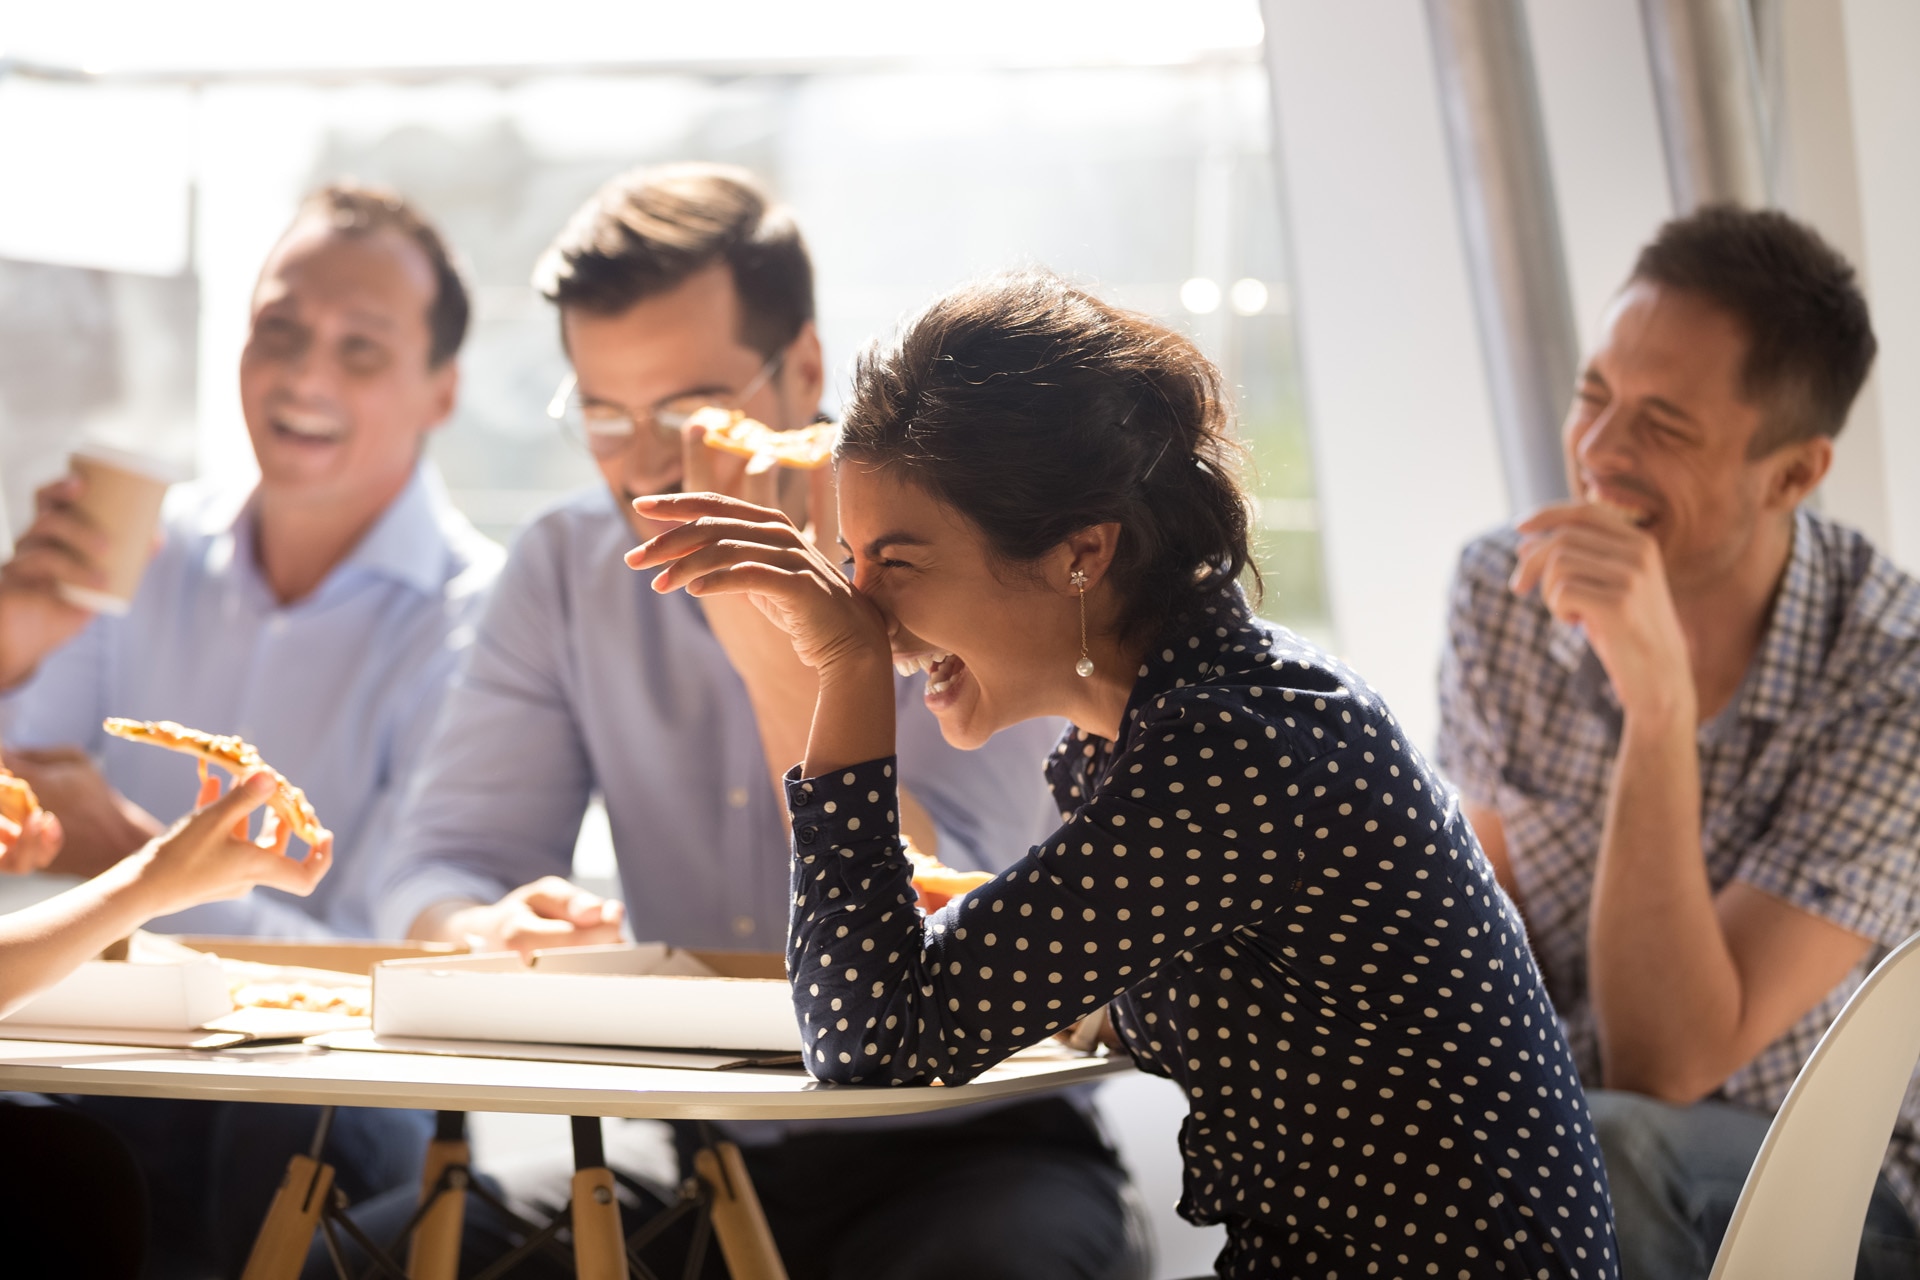 Indian woman laughing at funny joke eating pizza with diverse coworkers in office, friendly work team enjoying positive emotions and lunch together, happy colleagues staff group having fun at break; Shutterstock ID 1206996136; purchase_order: -; job: -; client: -; other: -